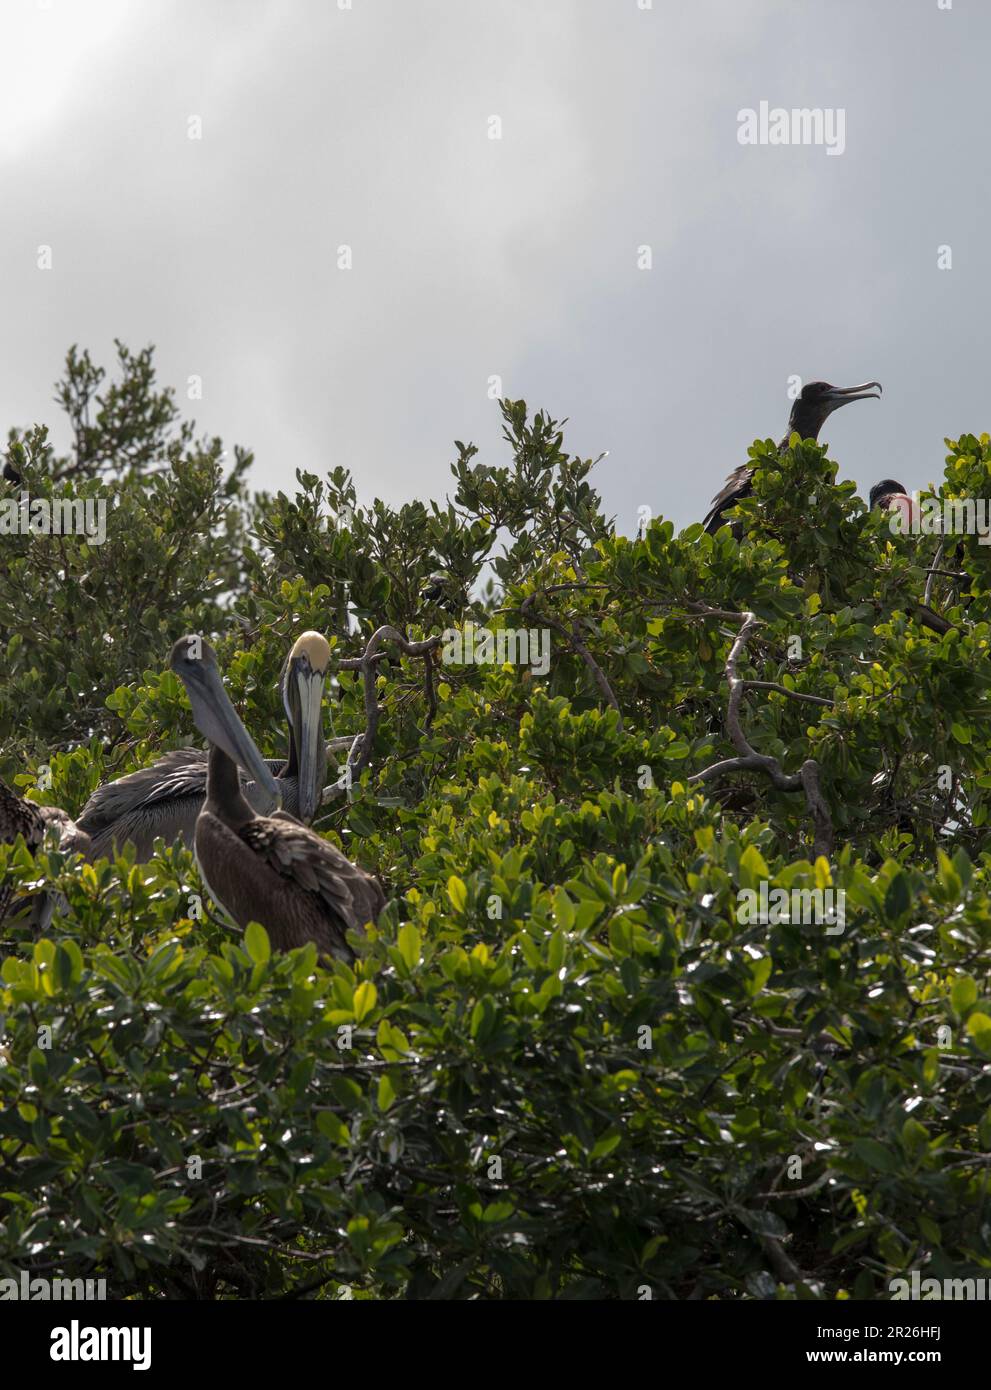 View of tree with brown pelican birds, Mexico Stock Photo